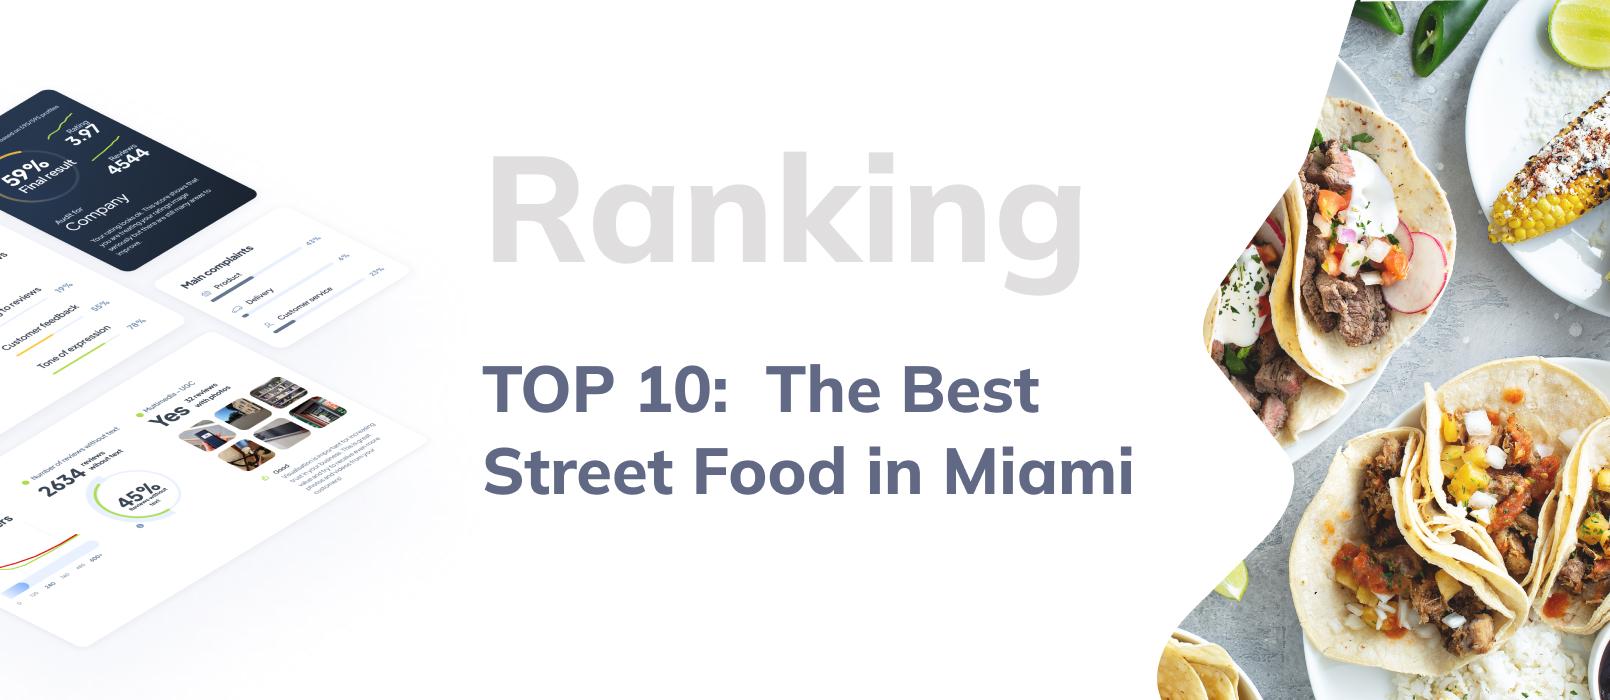 The Best Street Food in Miami - TOP 10 ranking